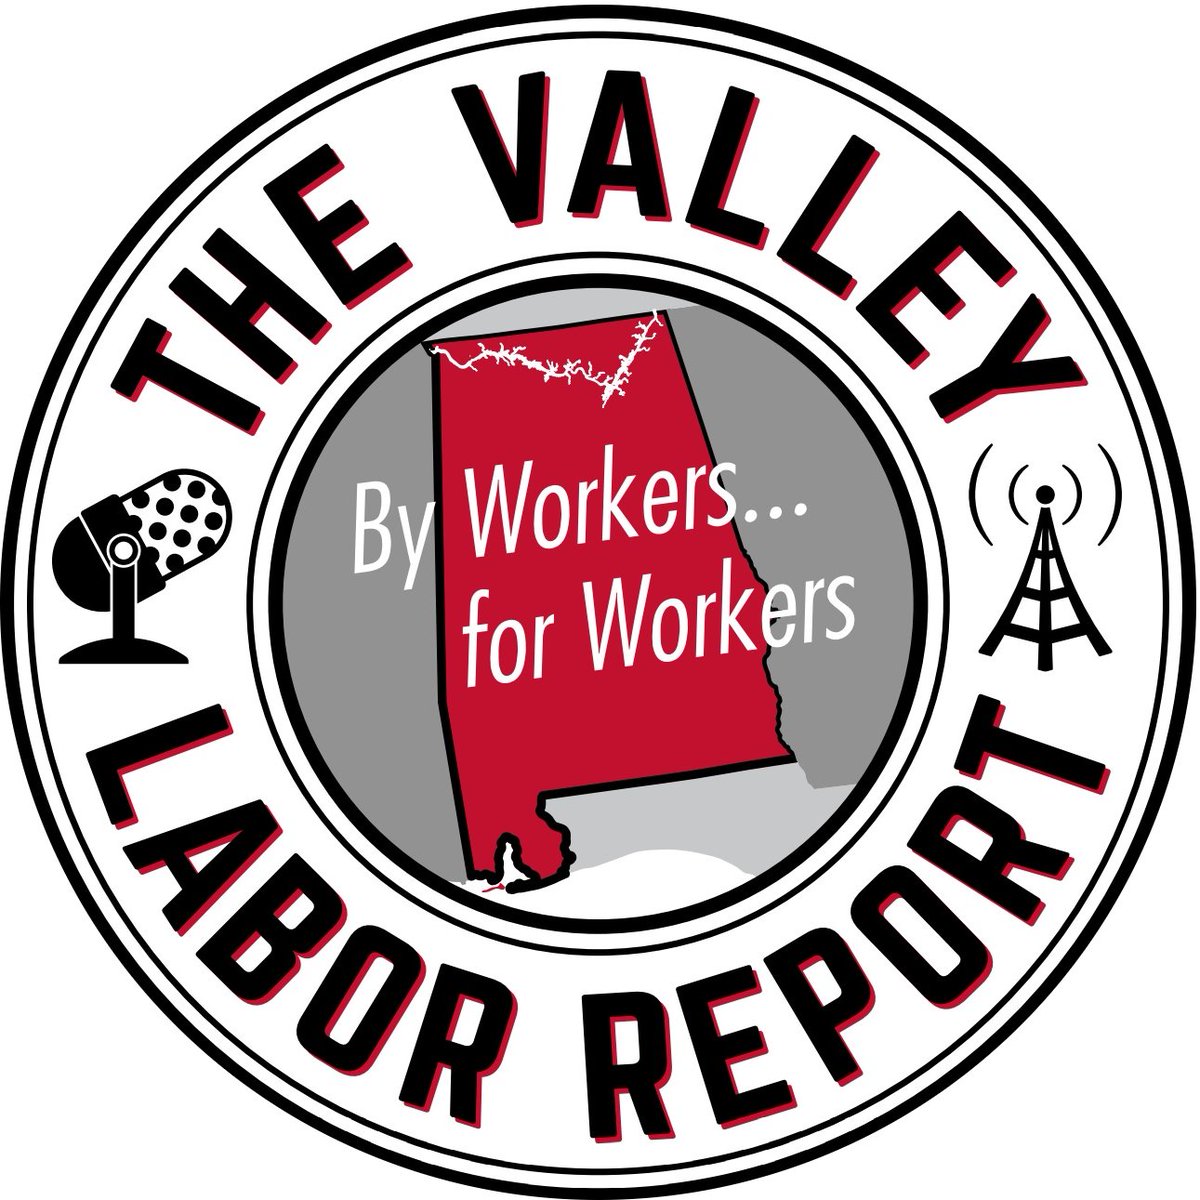 - “We don't have time to wait” – The Valley Labor Report talks with Alabama auto workers

On today’s Labor Radio Podcast DAILY #podcast:
podbean.com/eas/pb-t2y23-1…

laborradionetwork.org

@LaborReporters @AFSCME @wpfwdc @AFLCIO #1u #UnionStrong #LaborRadioPod